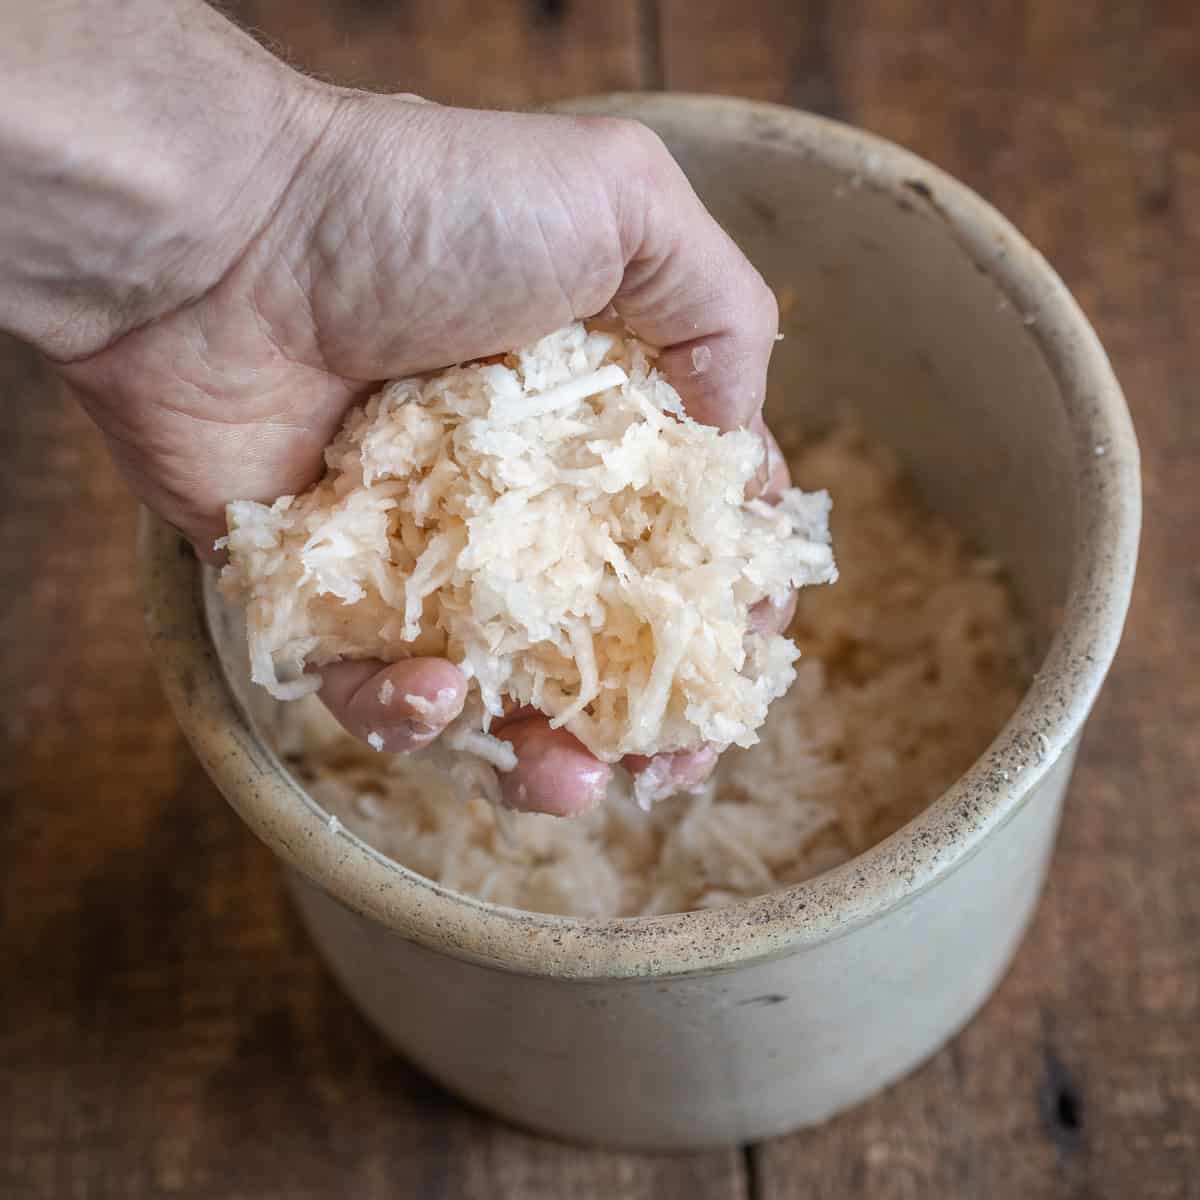 A hand digging into a crock of fermenting shredded turnips